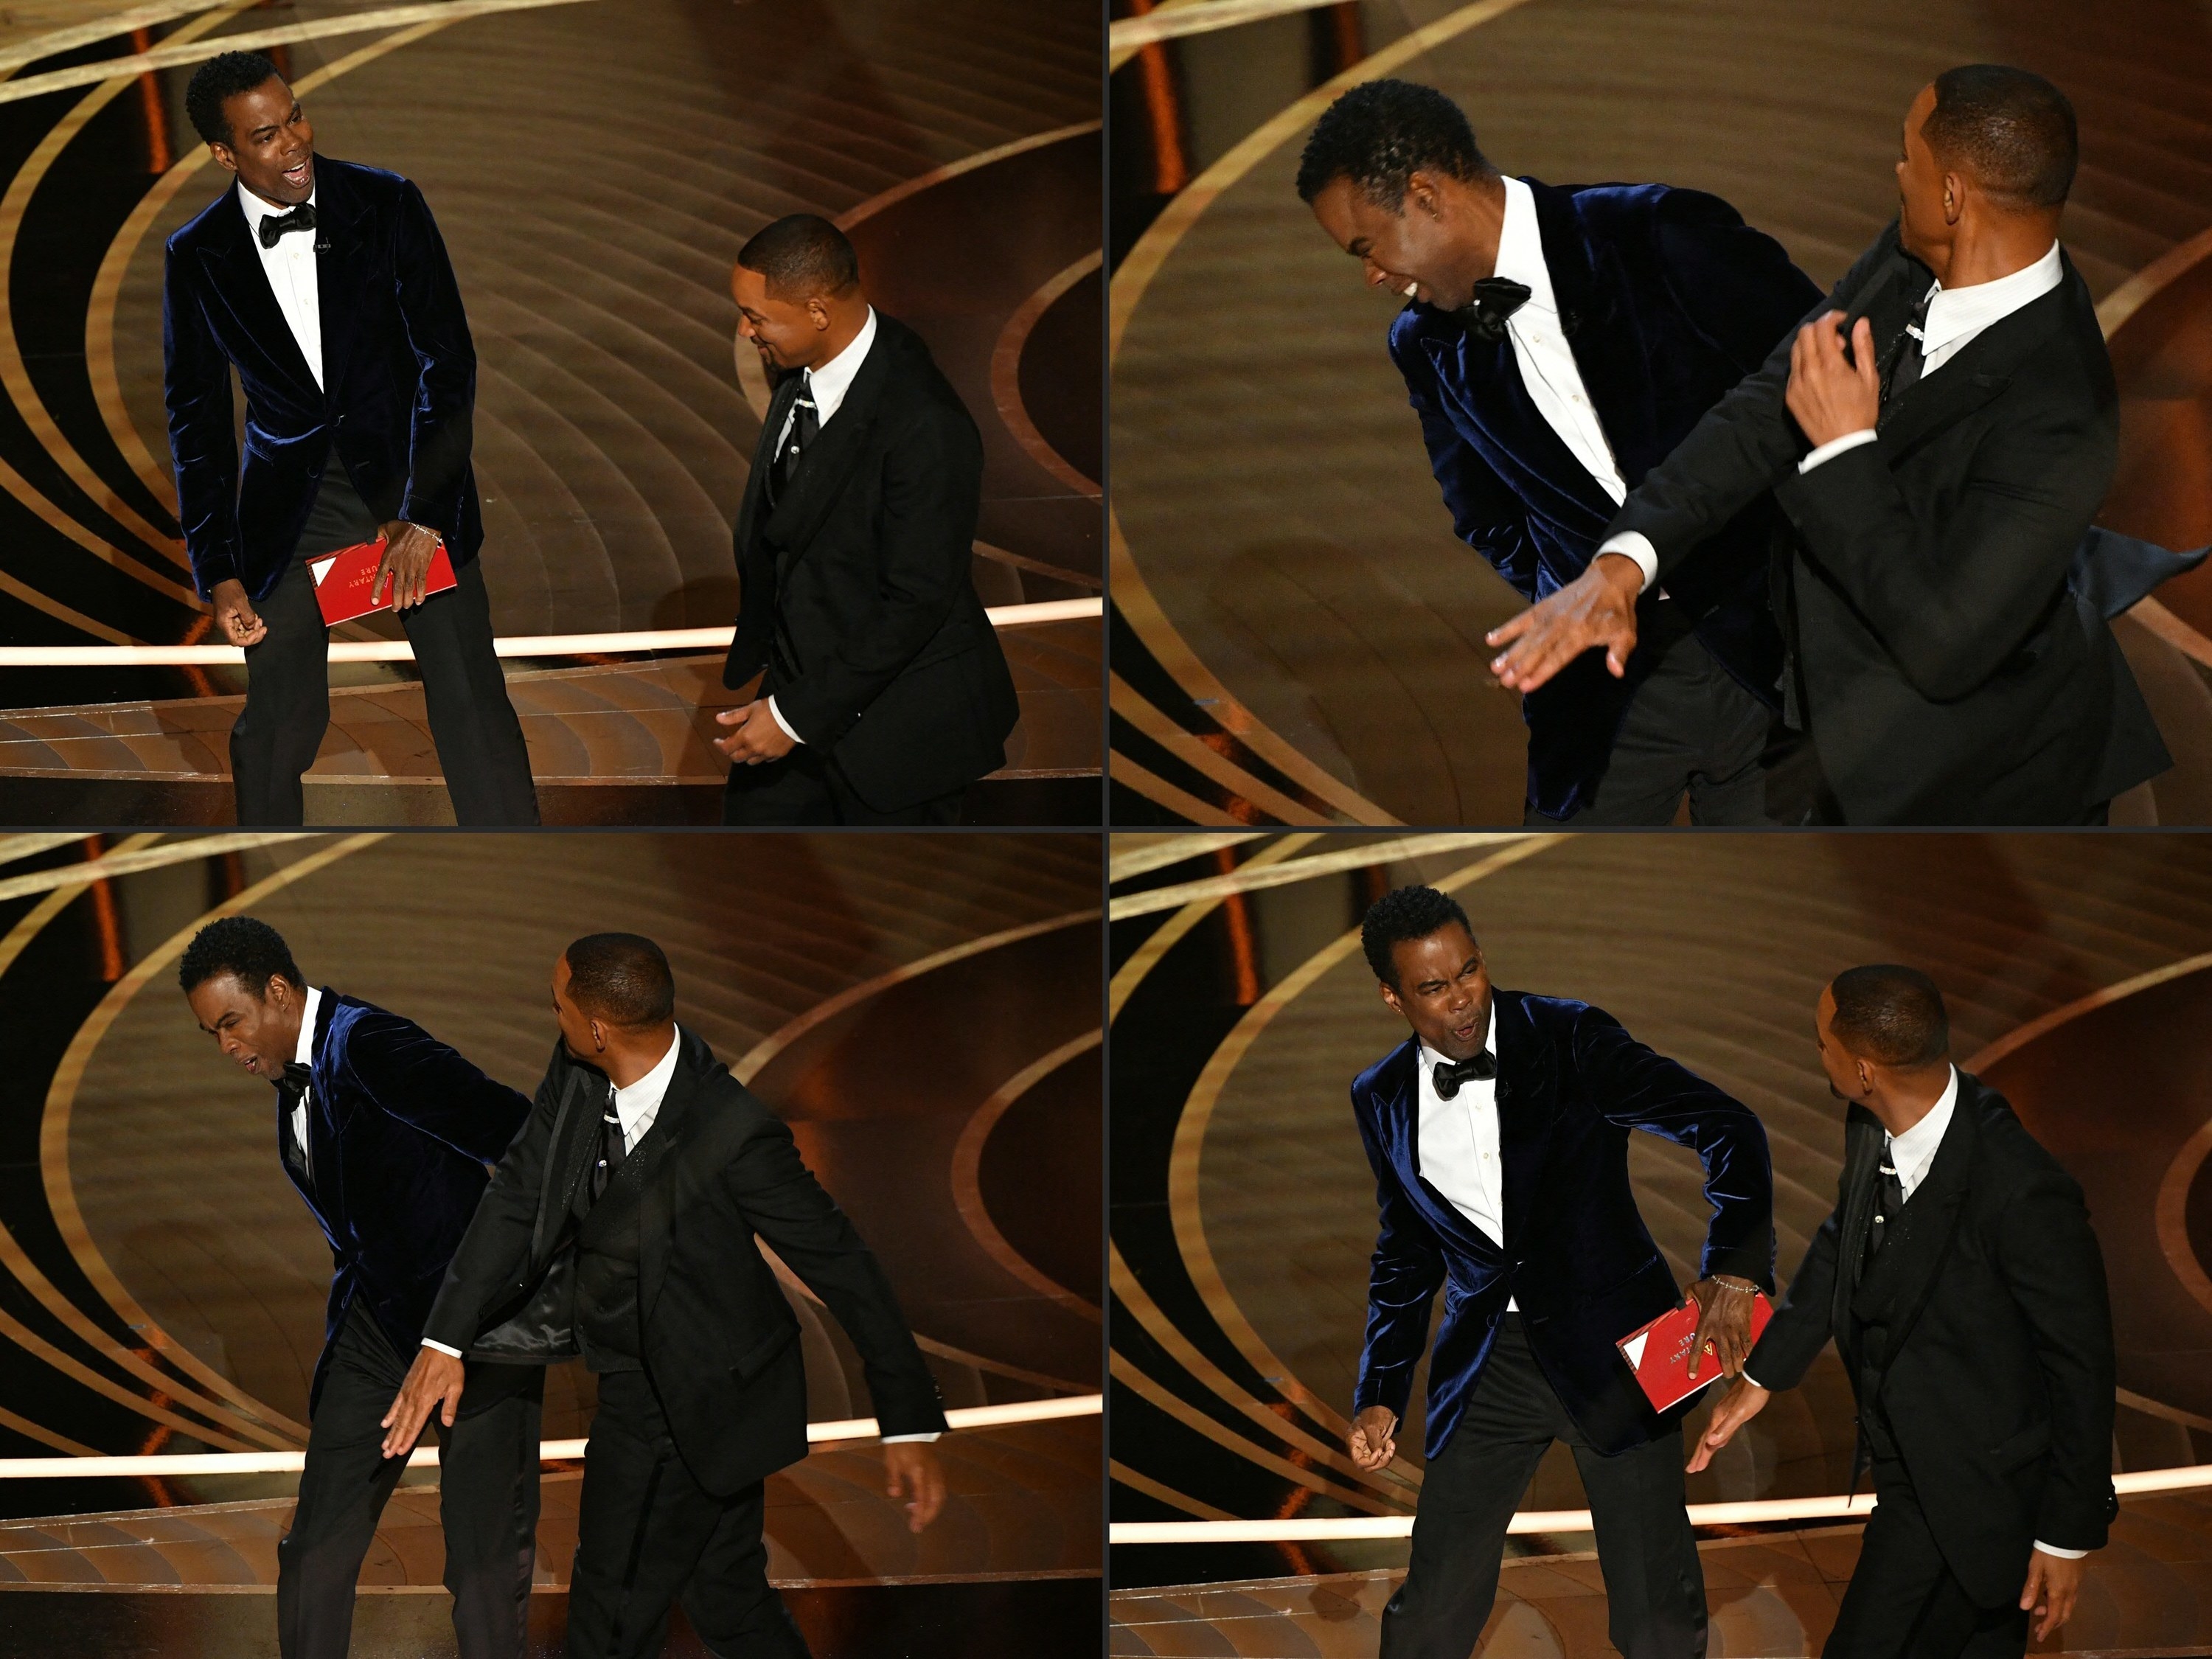 Collage of photos showing Will Smith walking up to Chris Rock and slapping him